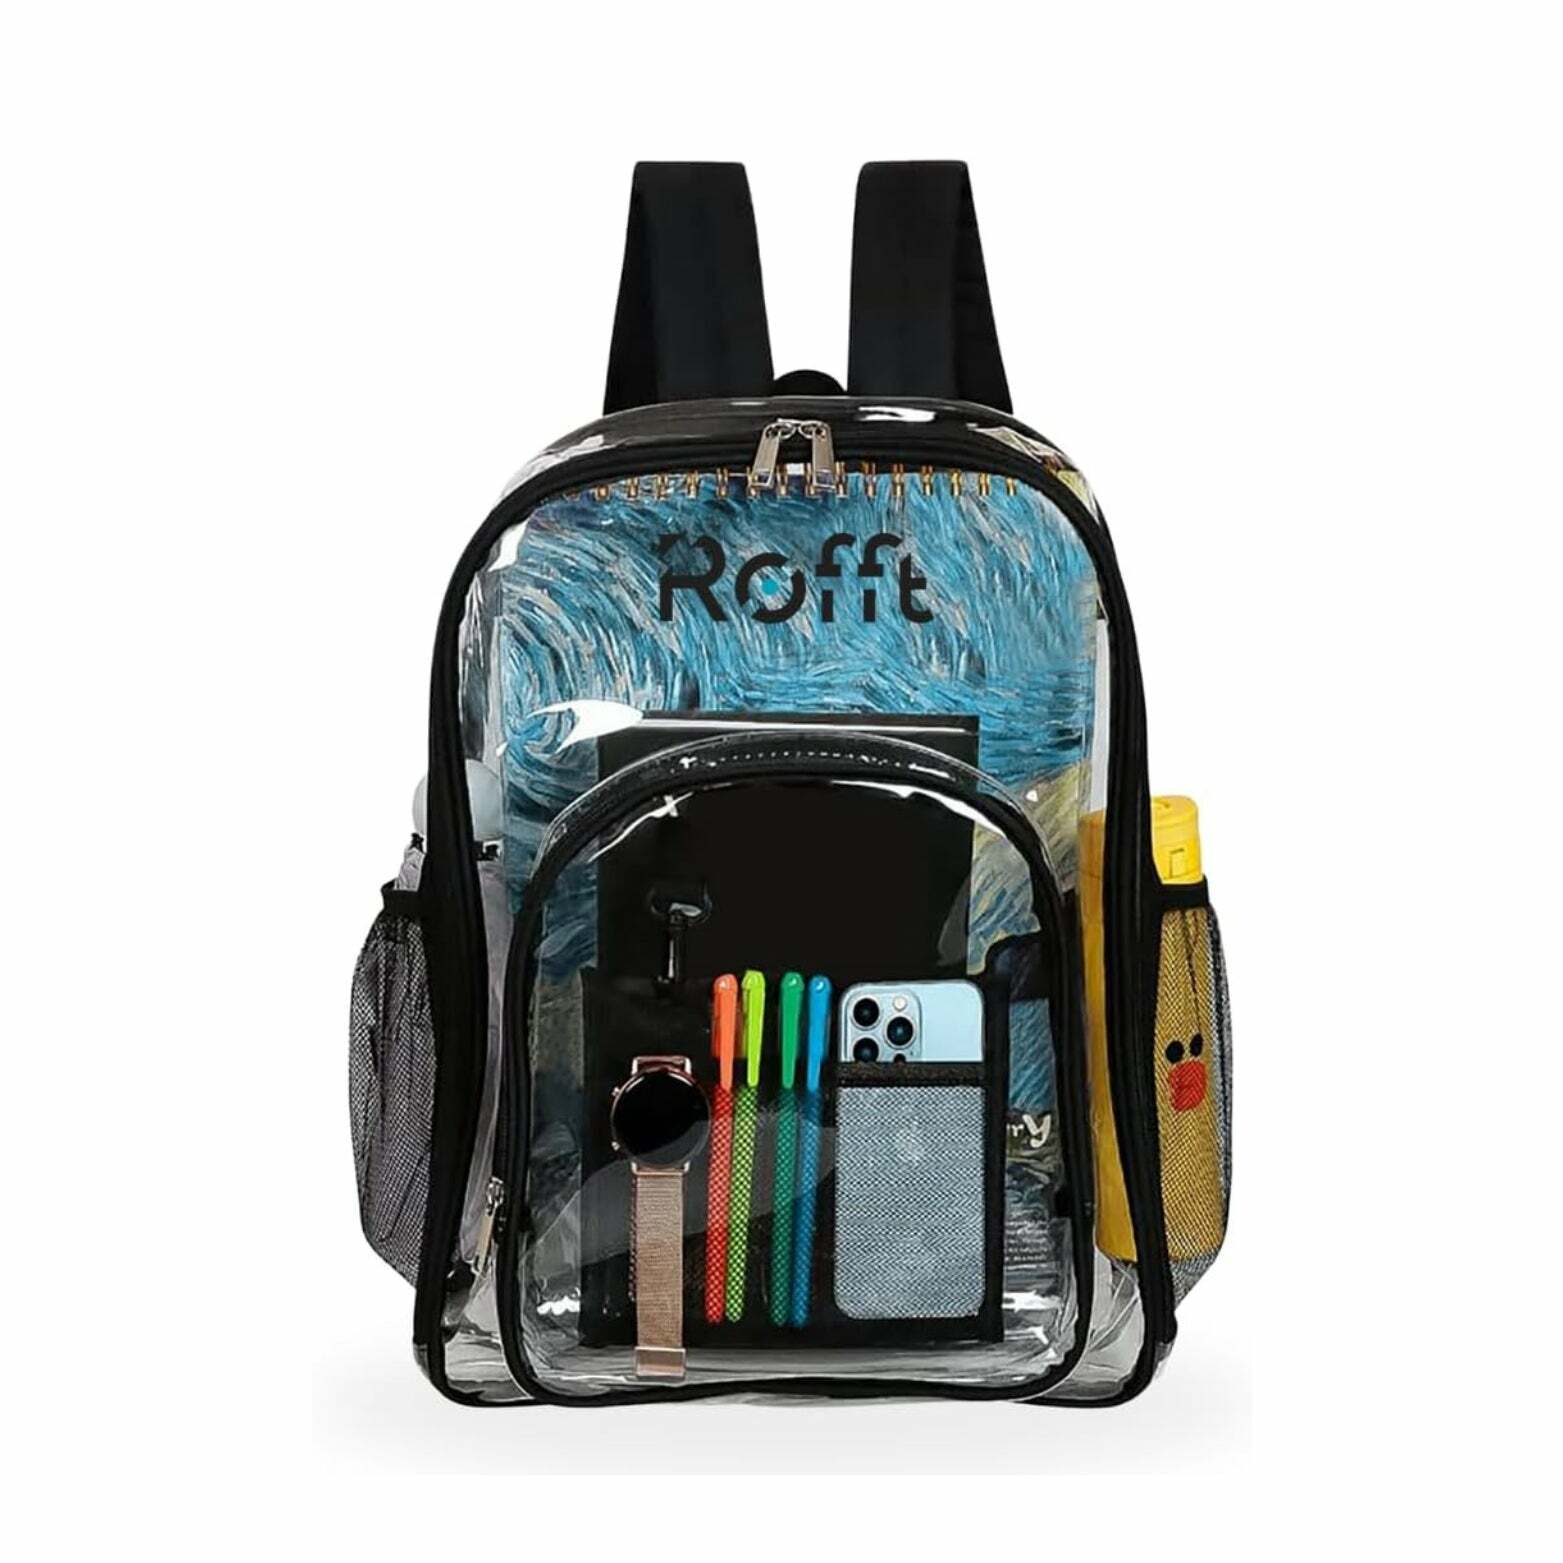 ROFFT Medium Clear Backpack - Durable PVC with Reinforced Straps and Multiple Pockets, Black